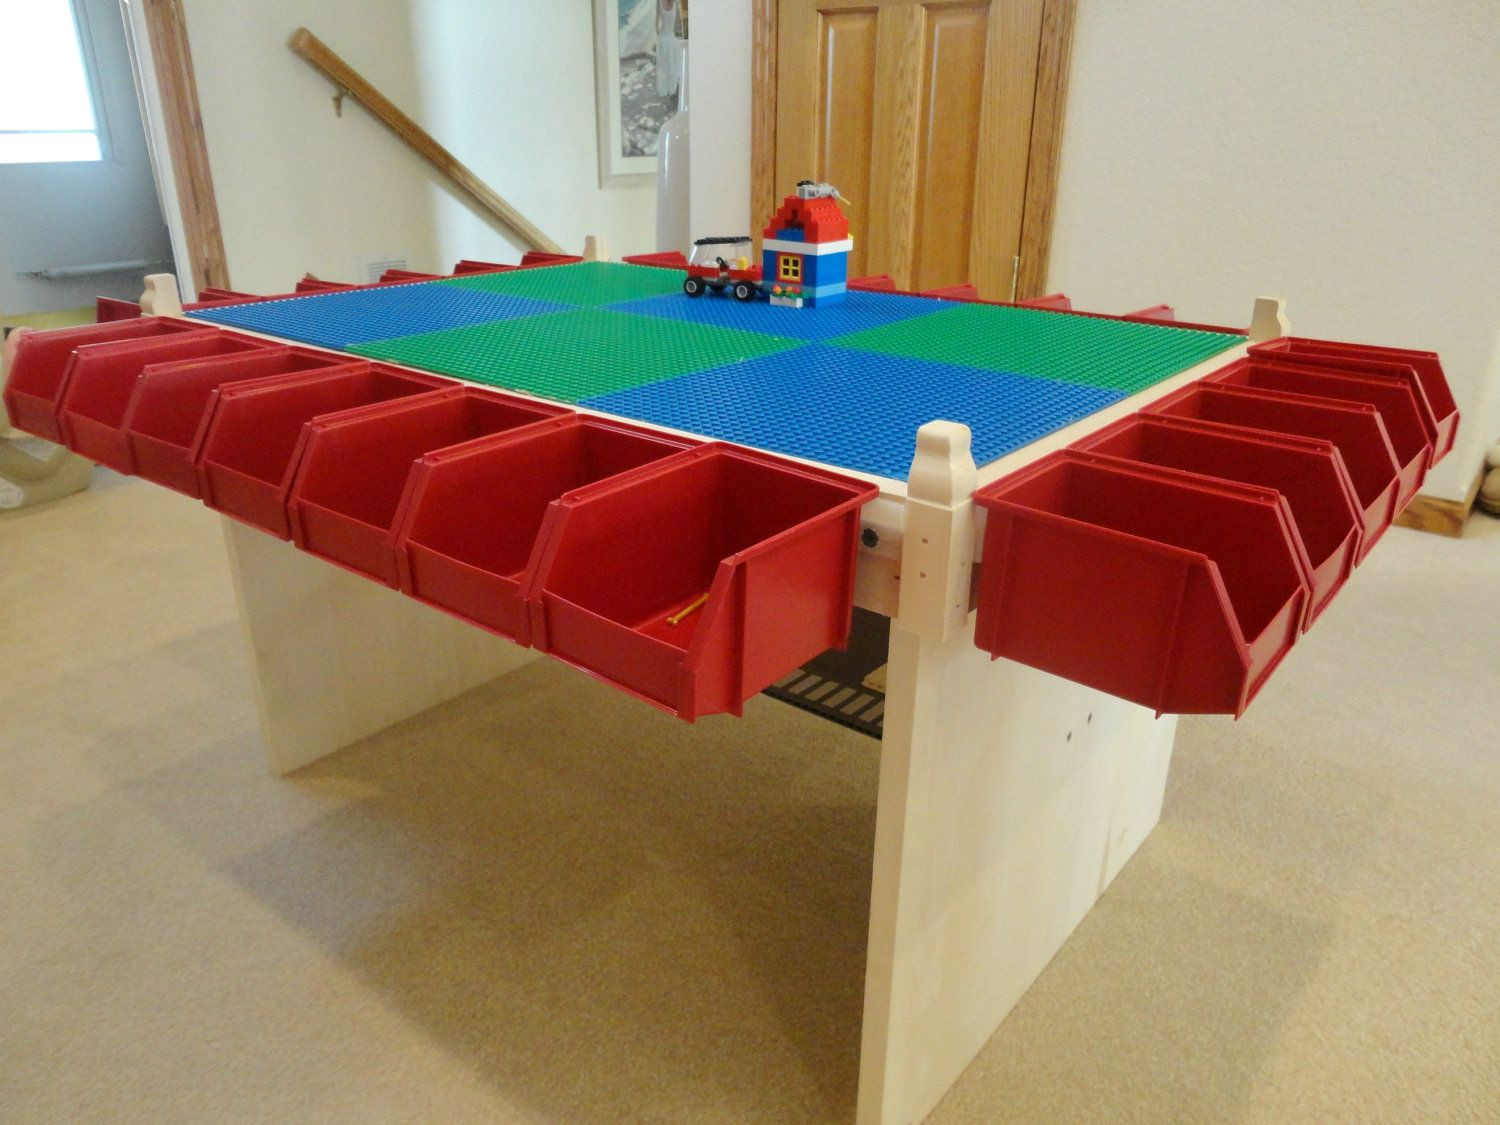 Kids Lego Table
 Lego table Kids Play table Lots of Storage Boys toy